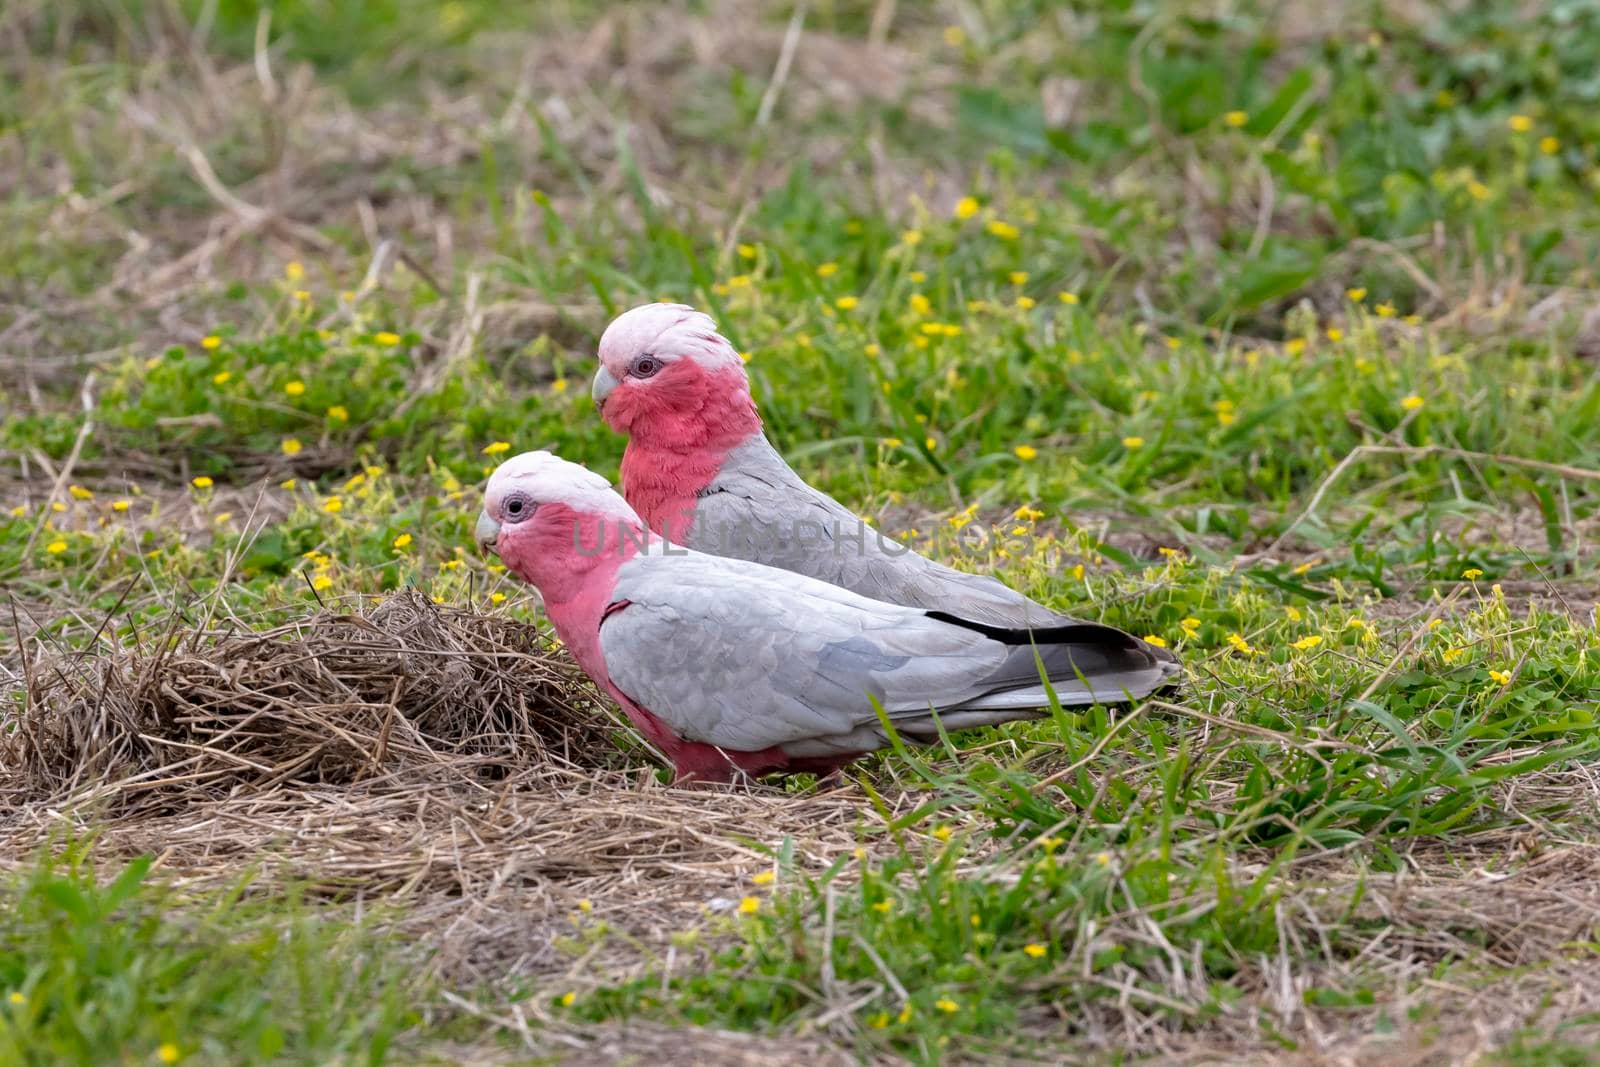 Galah cockatoos foraging for food on the ground in a field with grass and small flowers